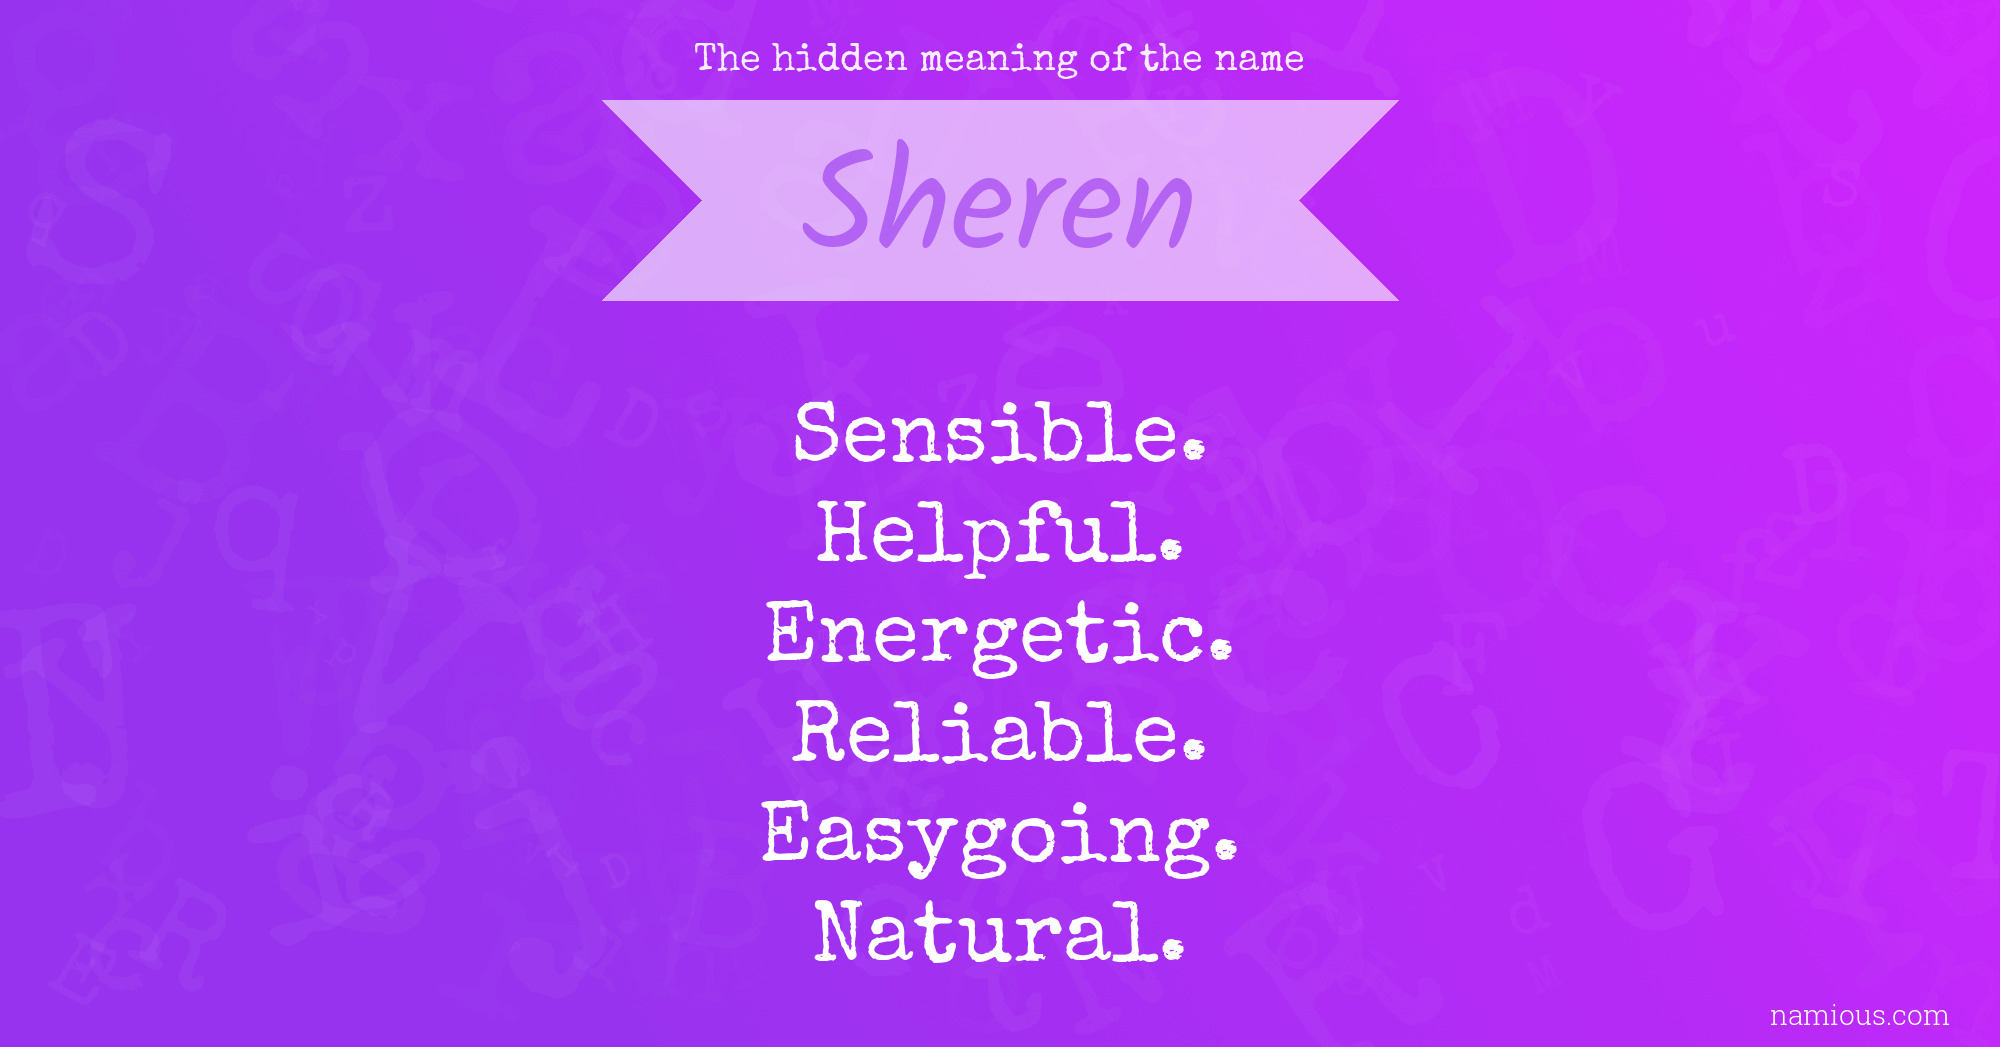 The hidden meaning of the name Sheren